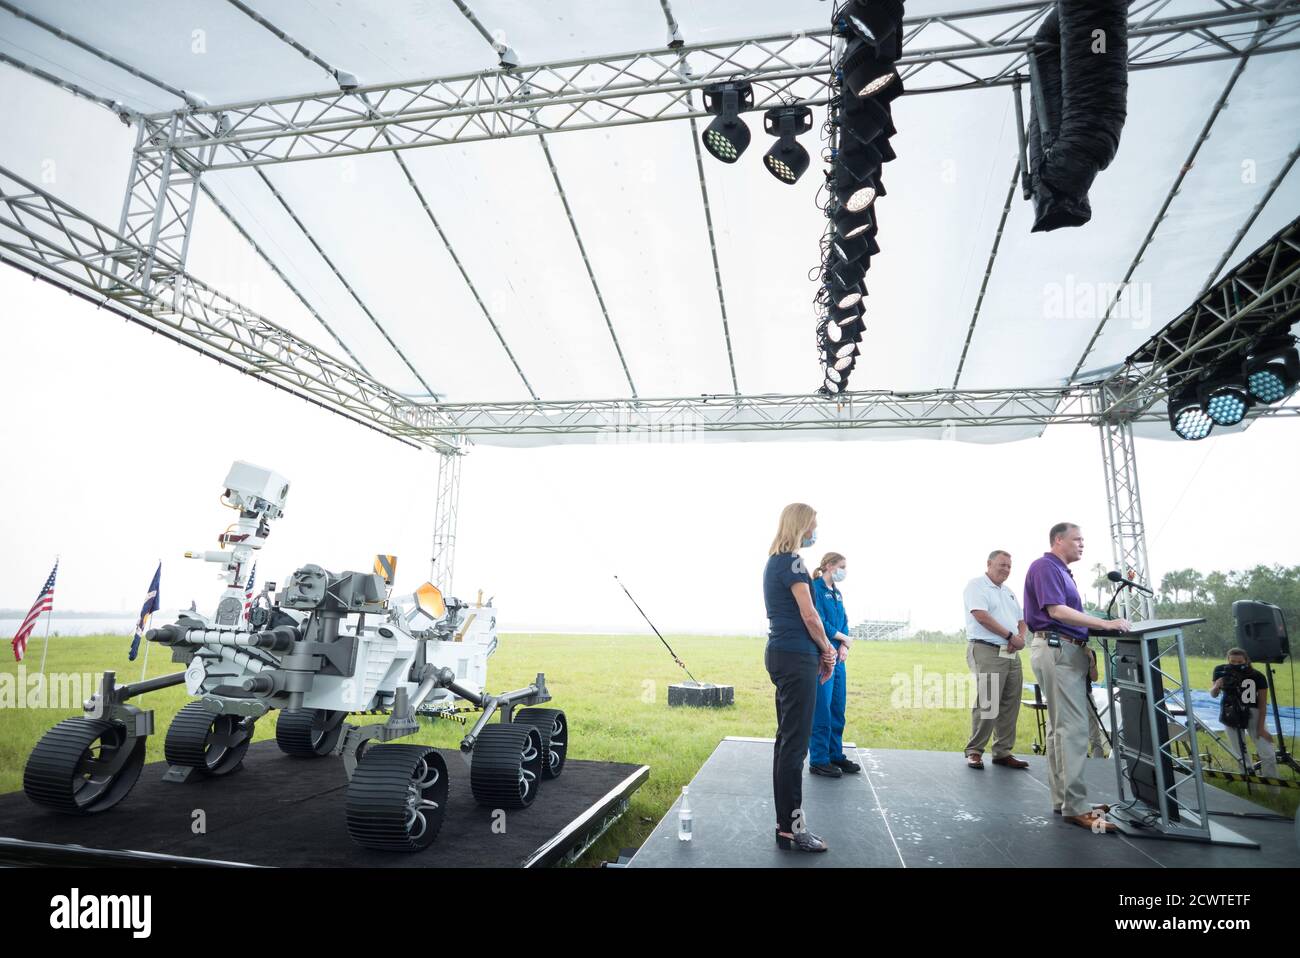 Mars 2020 Perseverance Prelaunch  A full-size model of NASA’s Mars 2020 Perseverance rover is seen during a press conference with Kennedy Space Center Deputy Director Janet Petro, left, NASA astronaut Zena Cardman, second from left, NASA Deputy Administrator Jim Morhard, second from right, and NASA Administrator Jim Bridenstine, right, ahead of the launch of NASA’s Mars 2020 Perseverance rover, Wednesday, July 29, 2020, at NASA’s Kennedy Space Center in Florida. The Perseverance rover is part of NASA’s Mars Exploration Program, a long-term effort of robotic exploration of the Red Planet. Launc Stock Photo